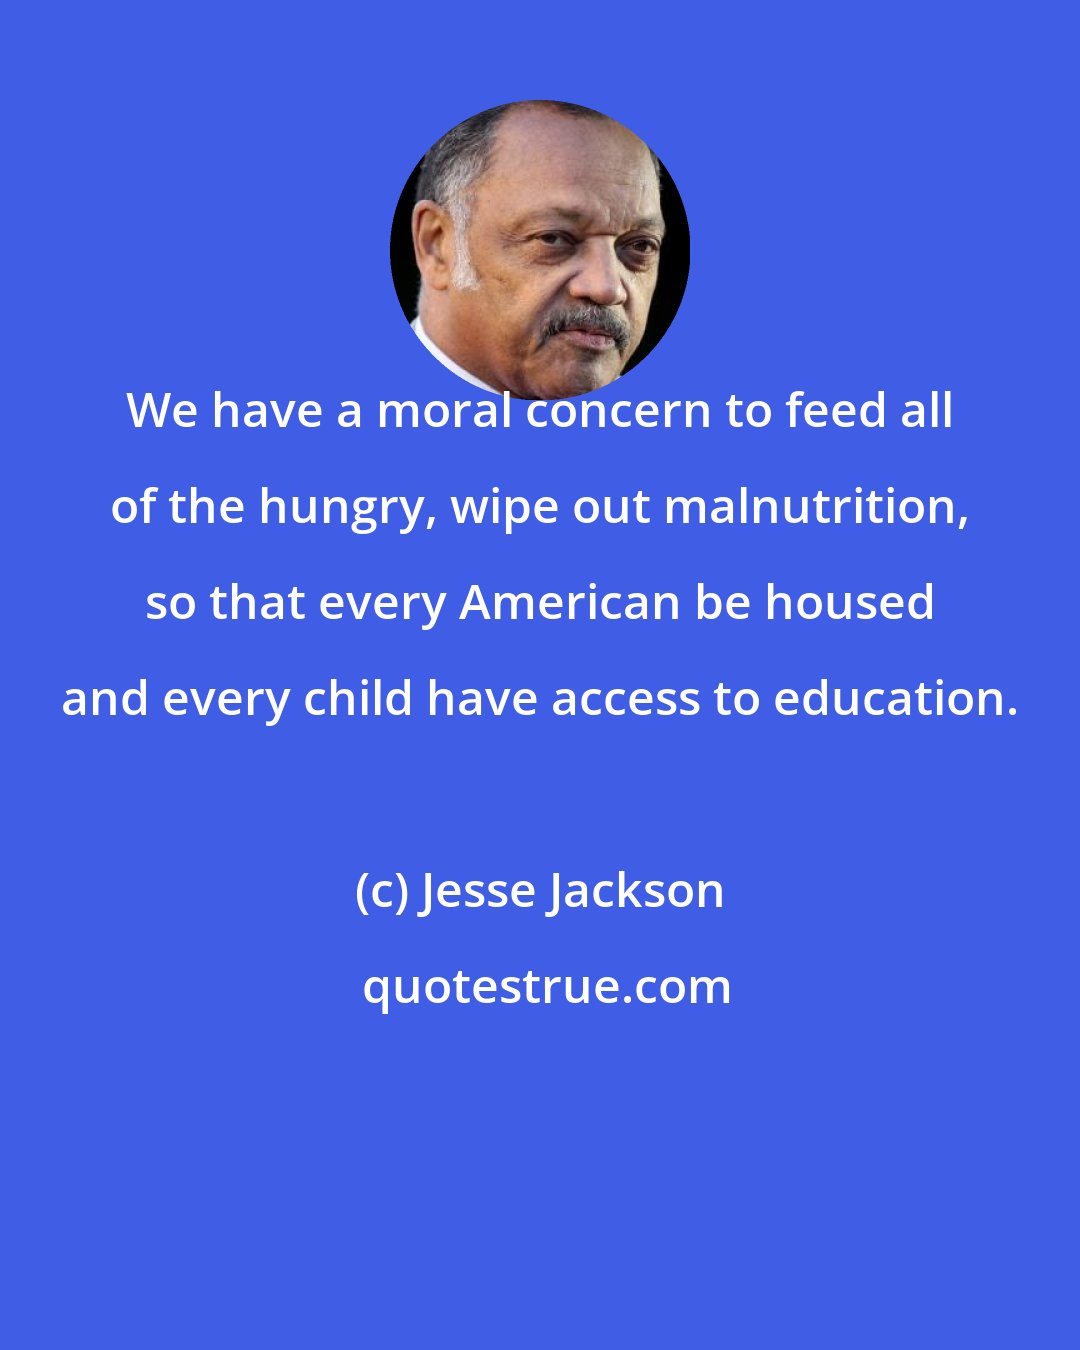 Jesse Jackson: We have a moral concern to feed all of the hungry, wipe out malnutrition, so that every American be housed and every child have access to education.